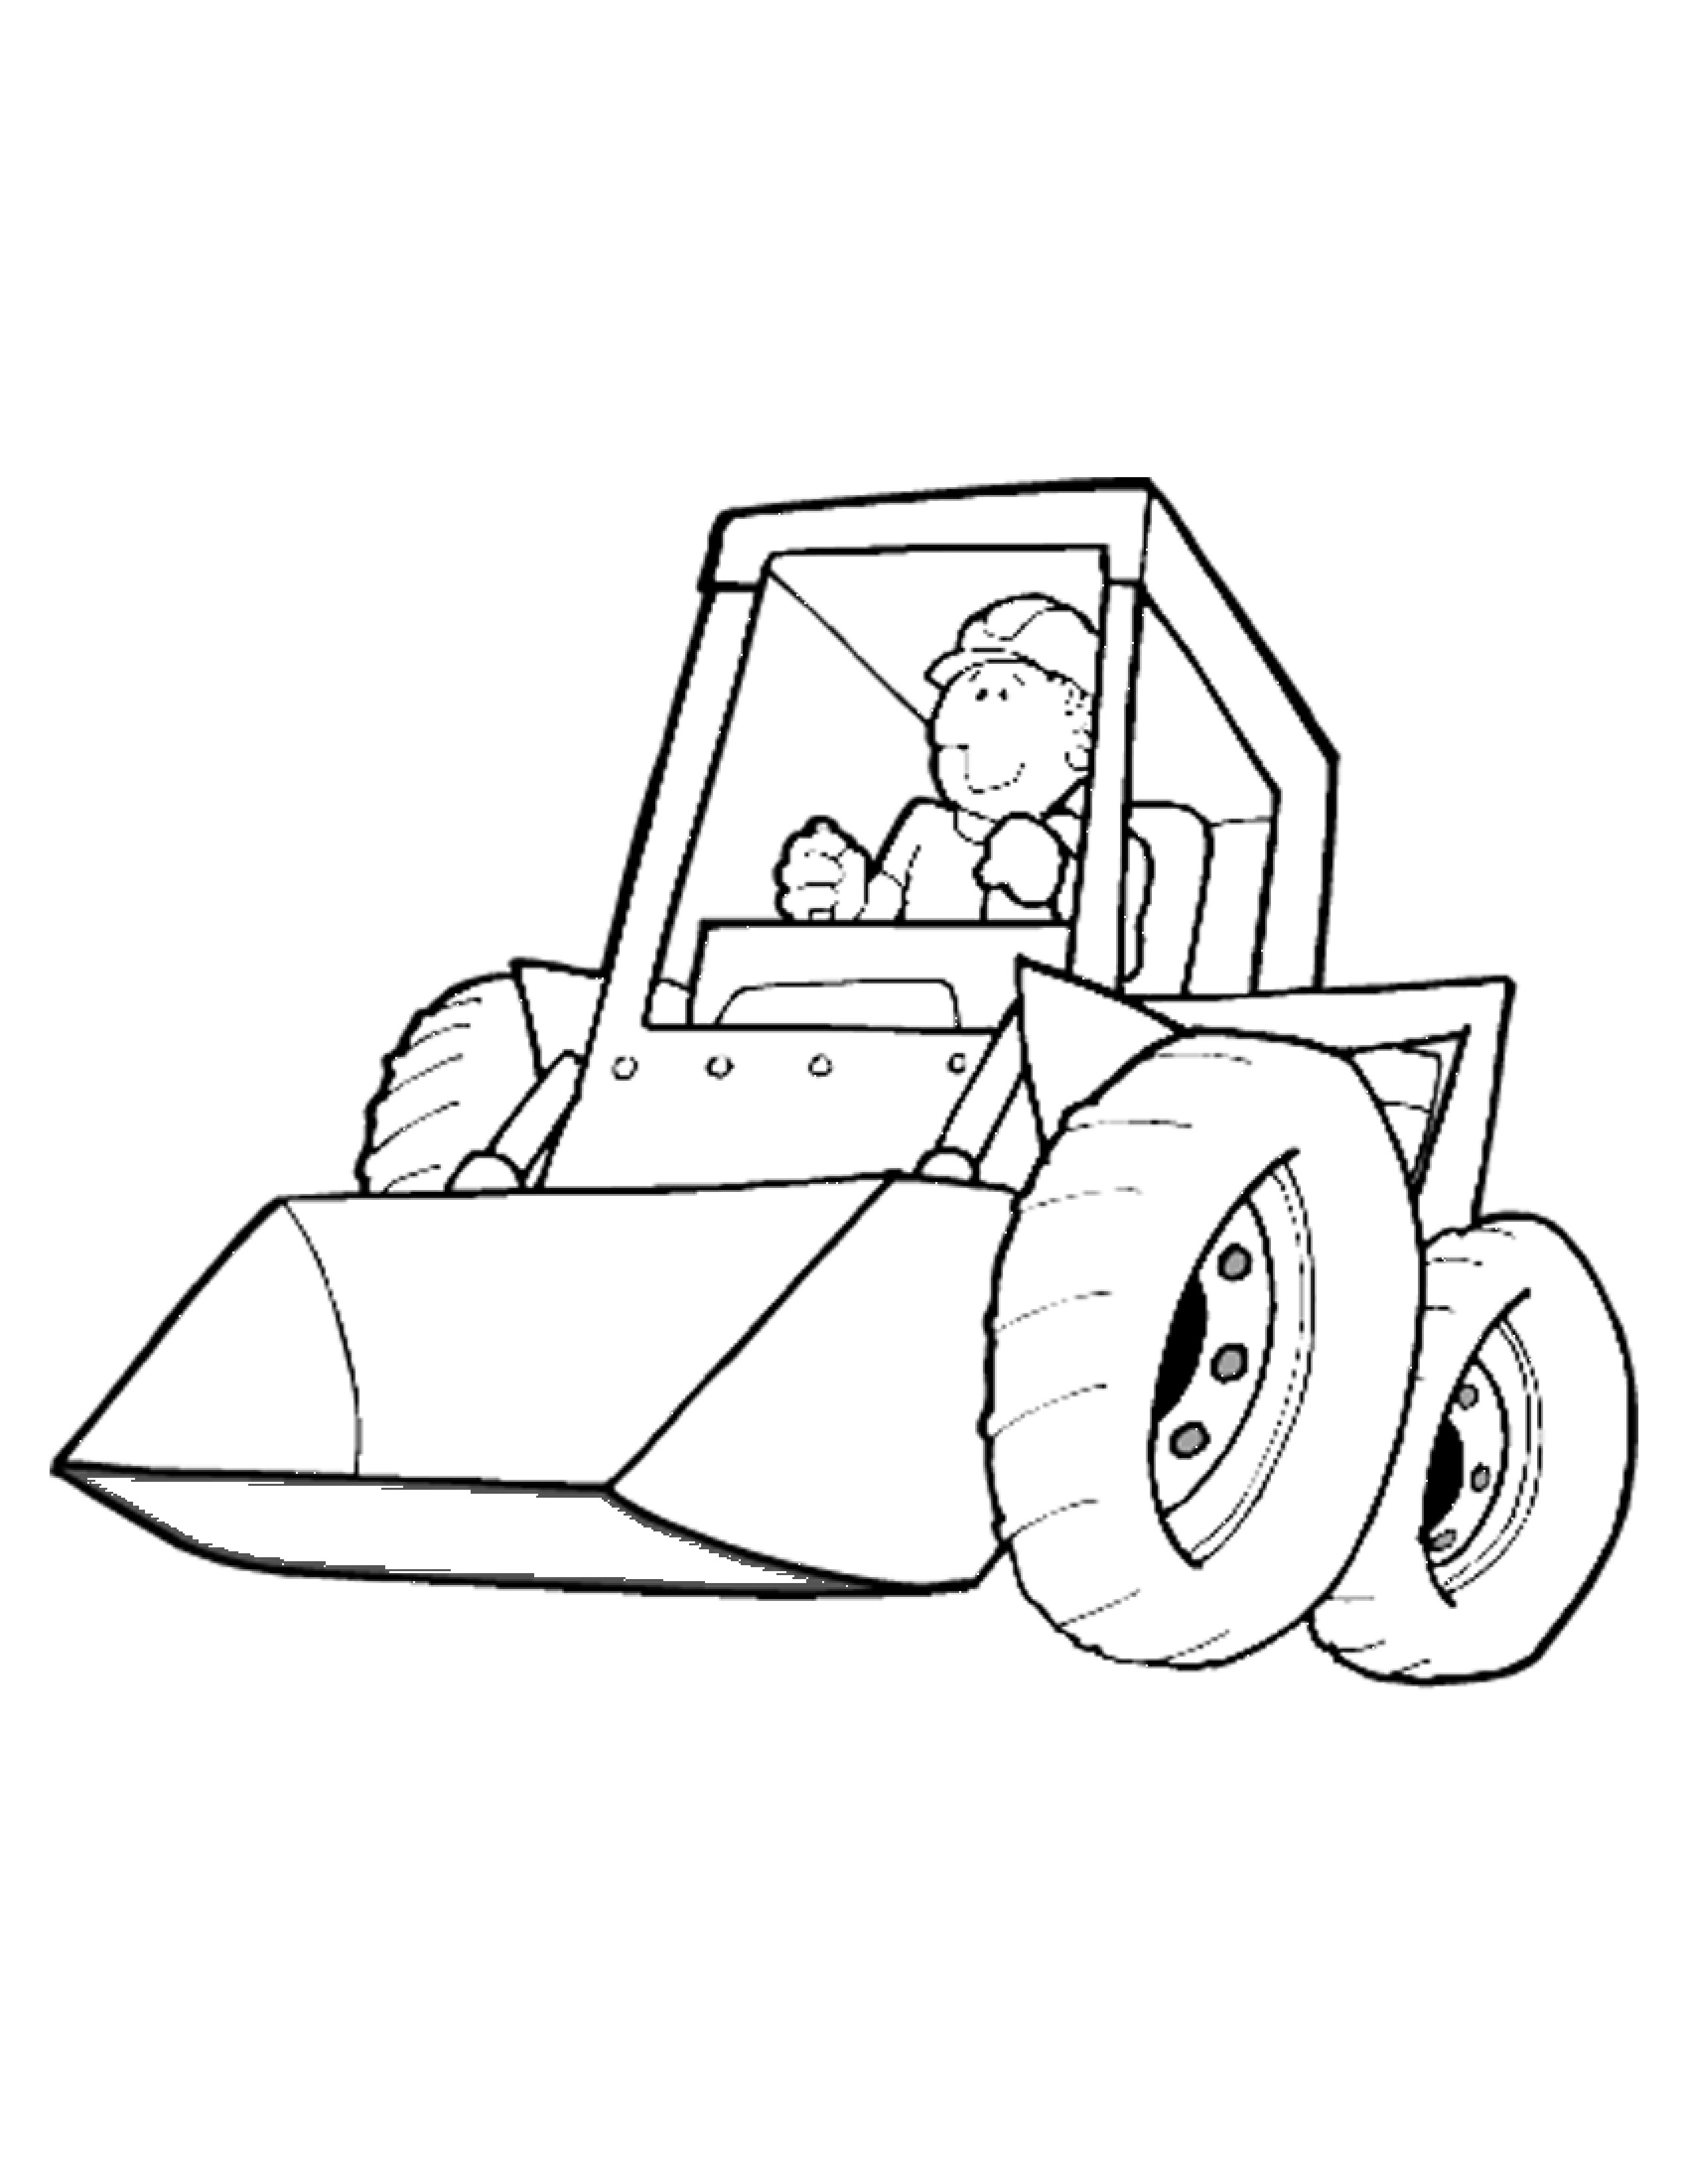 bulldozer pictures to color bulldozer drawing at getdrawingscom free for personal color pictures to bulldozer 